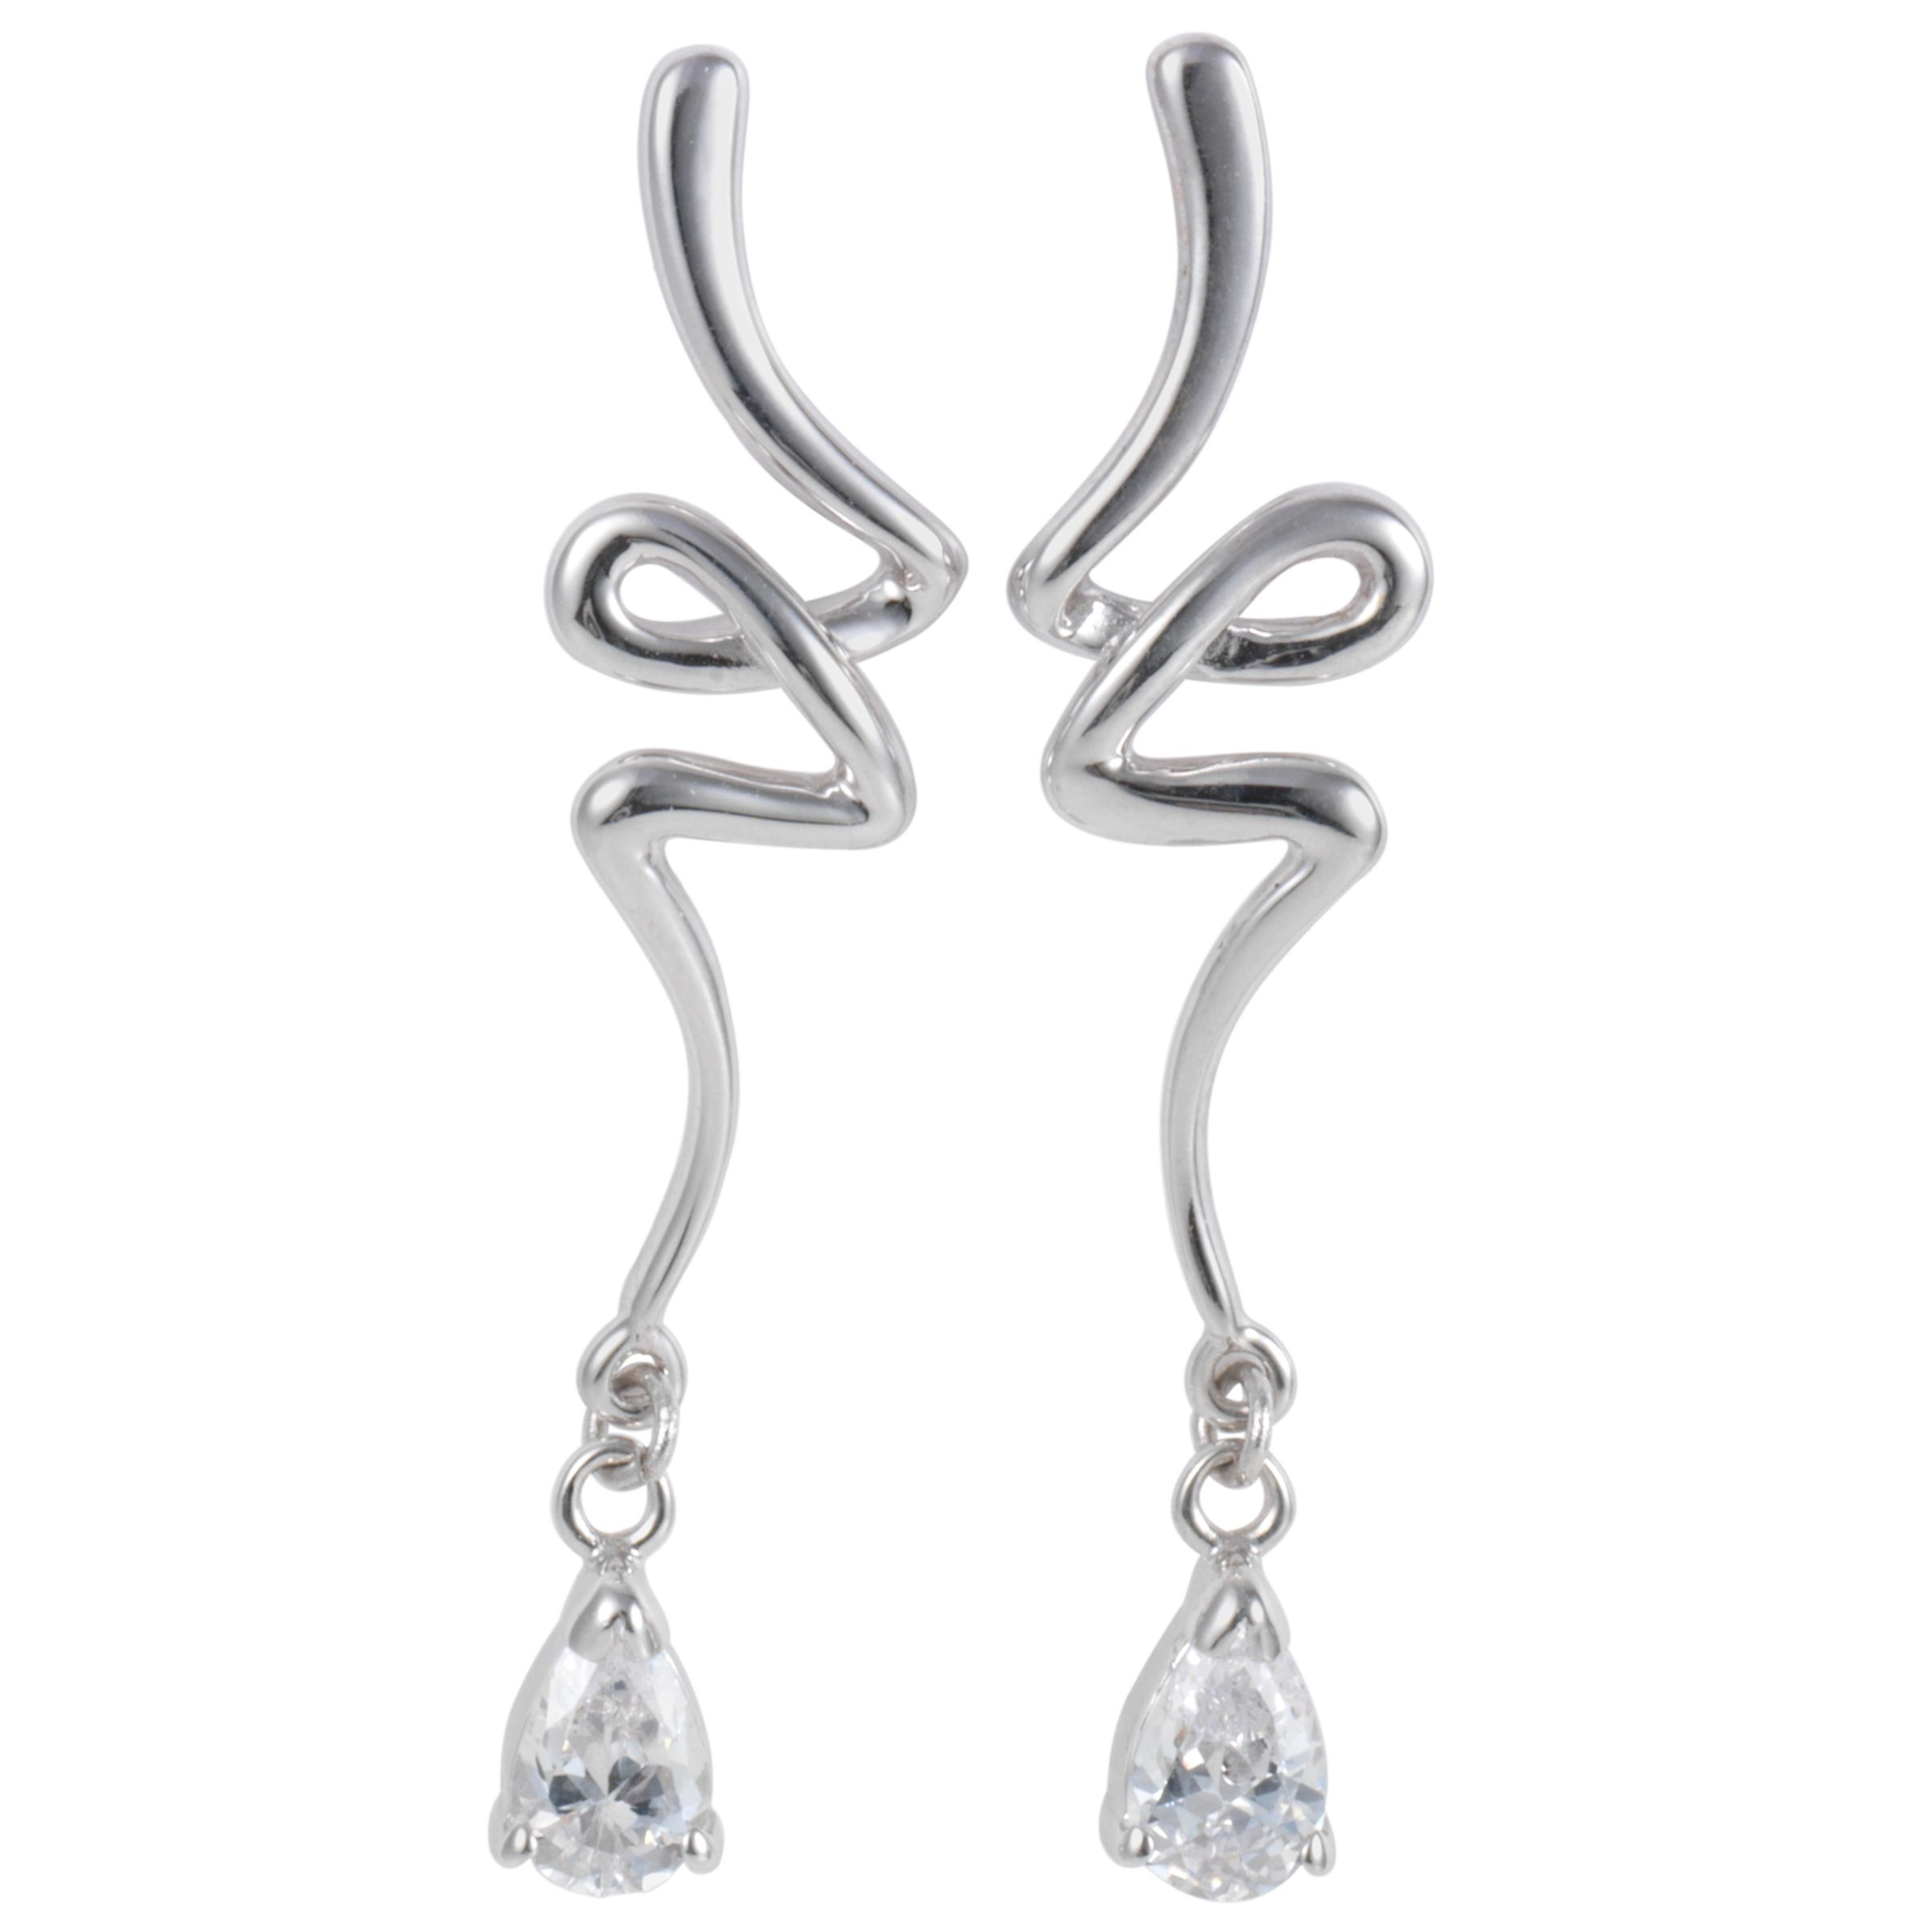 9ct White Gold "Squiggle" Cubic Zirconia Drop Earrings at John Lewis